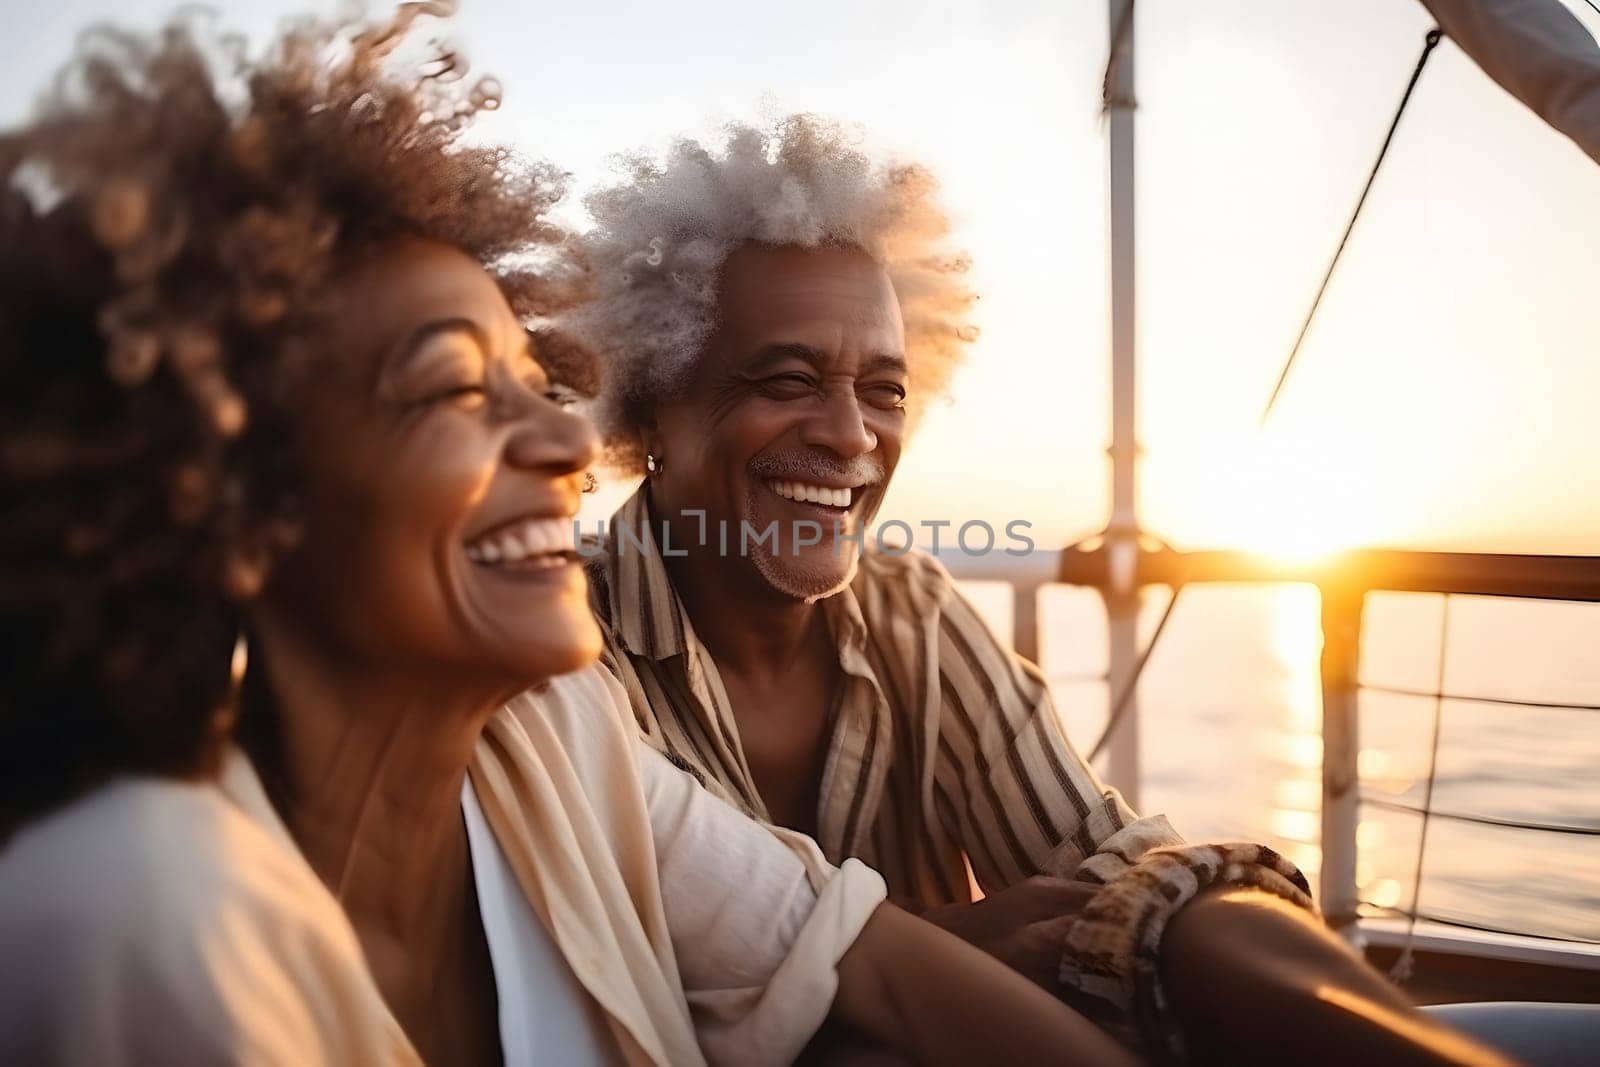 Beautiful and happy senior african american couple on a sailboat at sunset or sunrise, neural network generated image by z1b